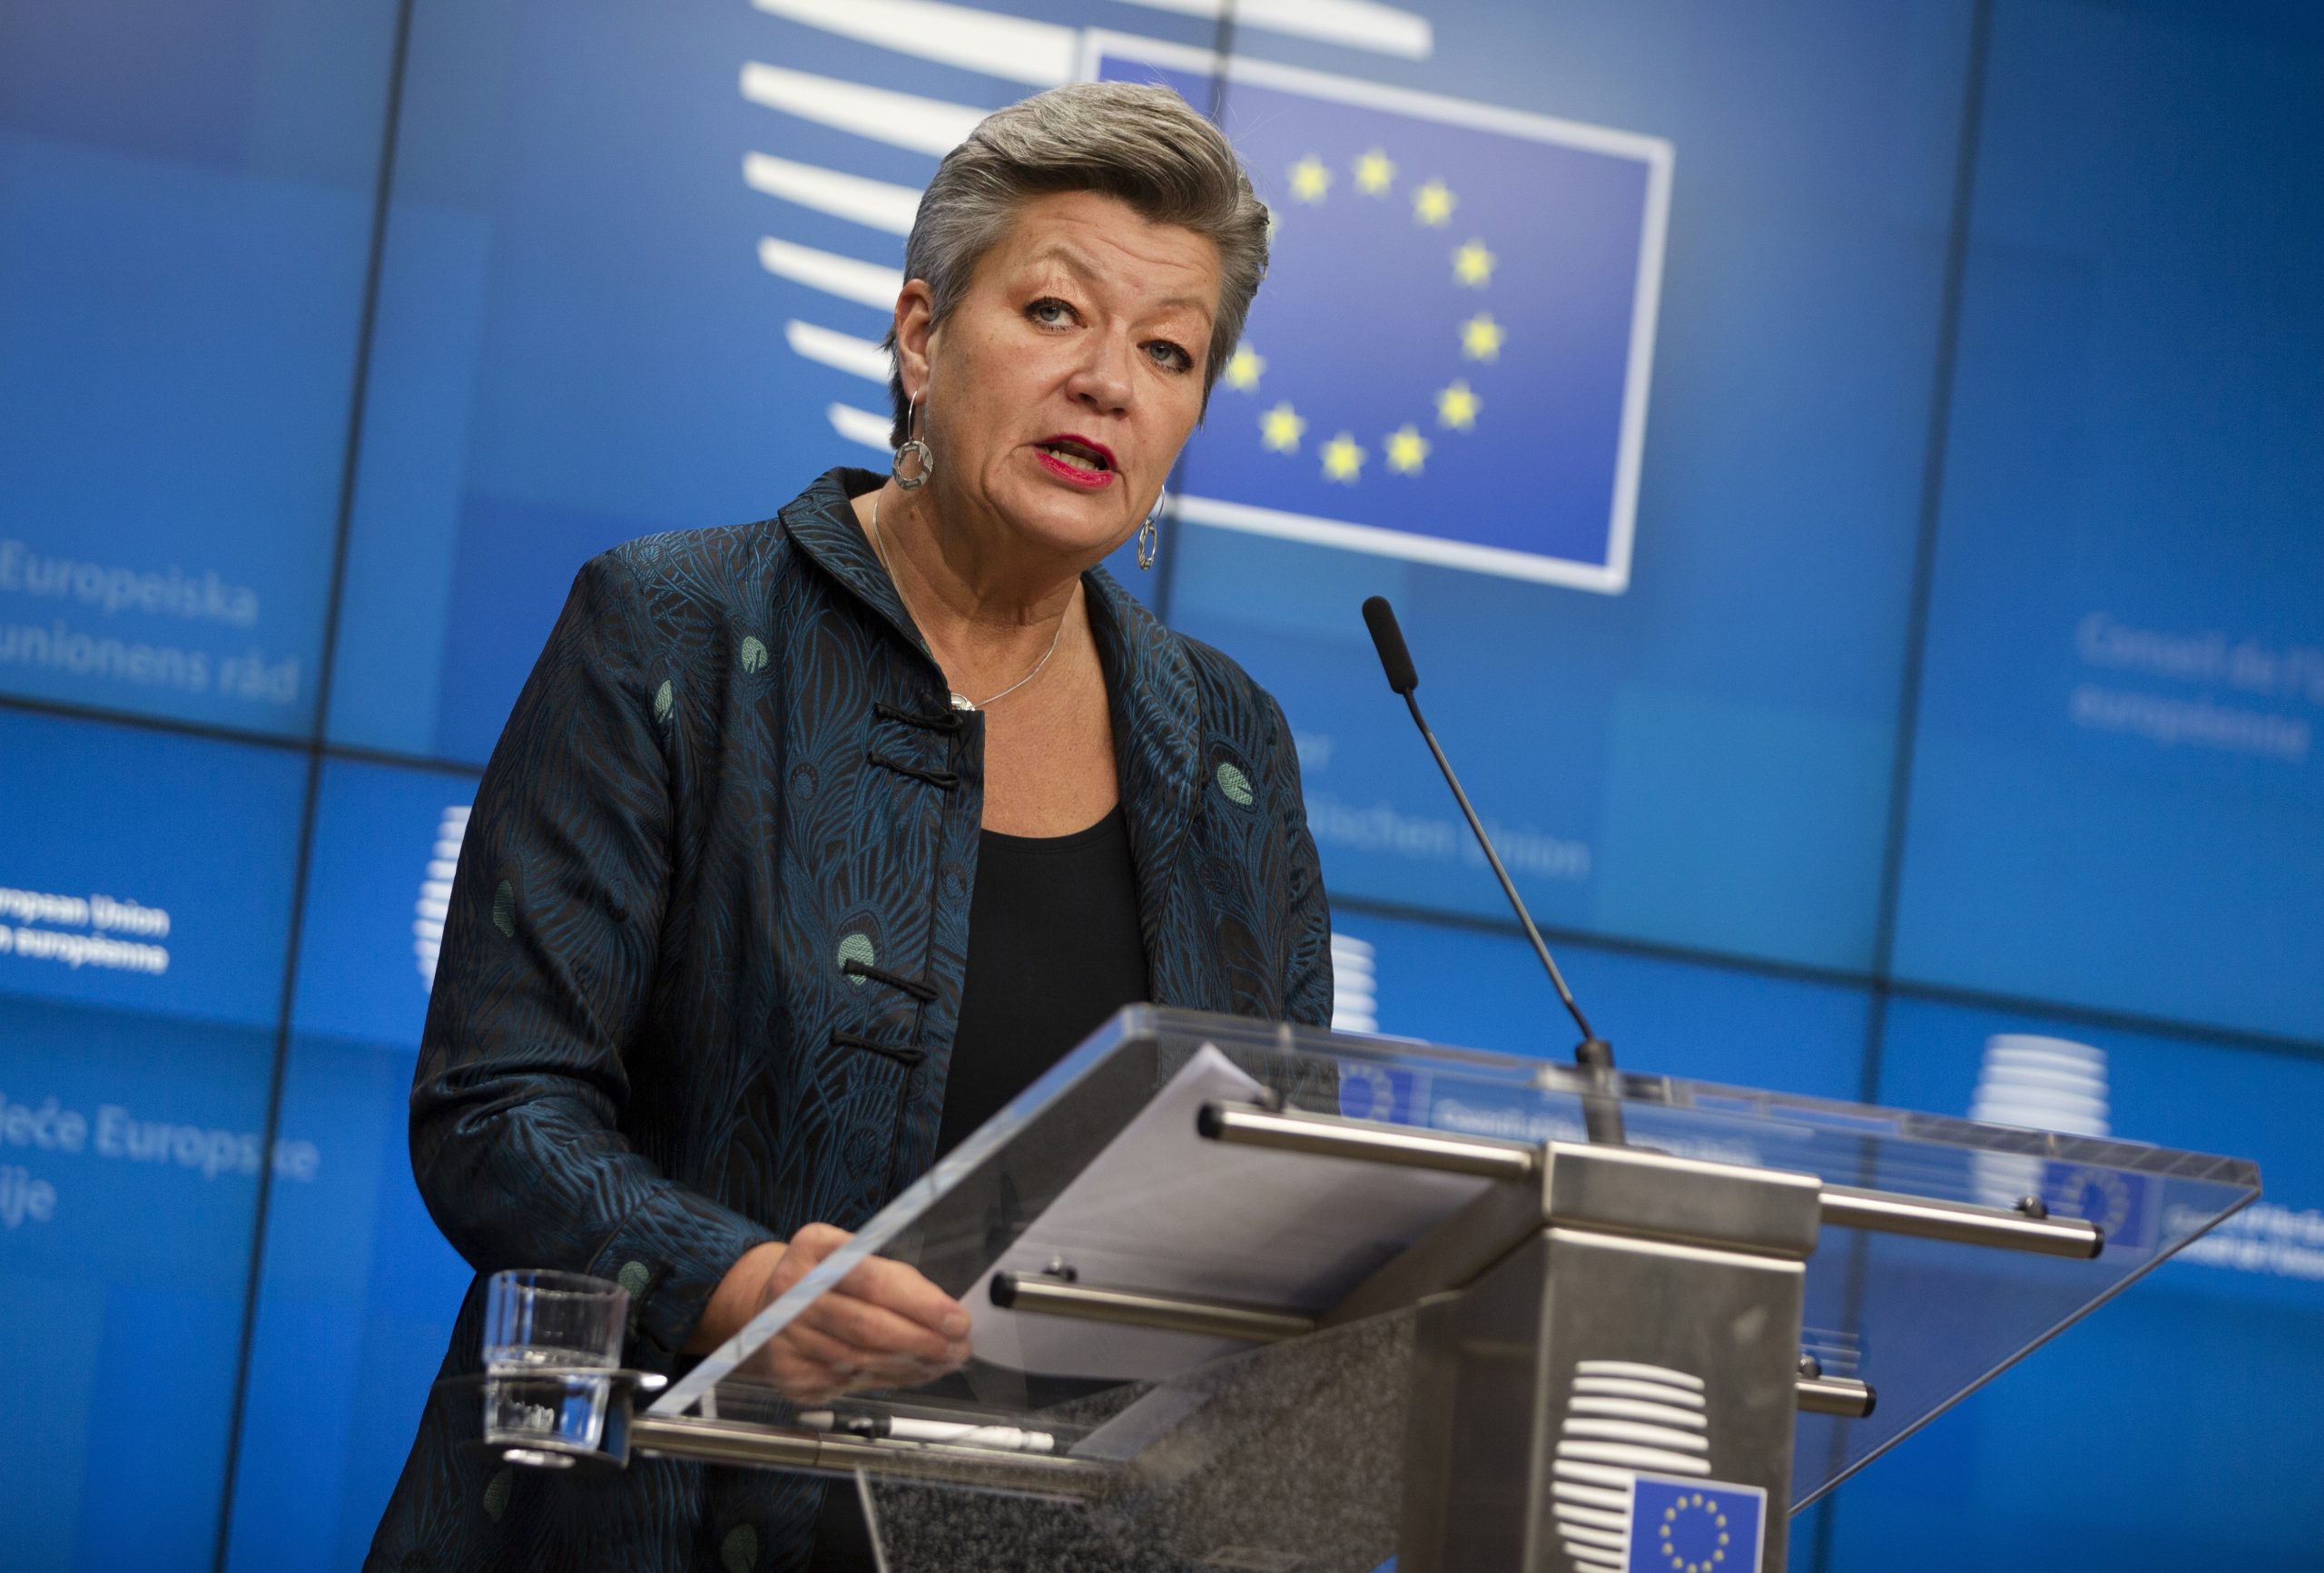 epa08818071 European Commissioner for Home Affairs Ylva Johansson during a media conference after a meeting of EU interior ministers at the European Council building in Brussels, Belgium, 13 November 2020.  EPA/Virginia Mayo / POOL